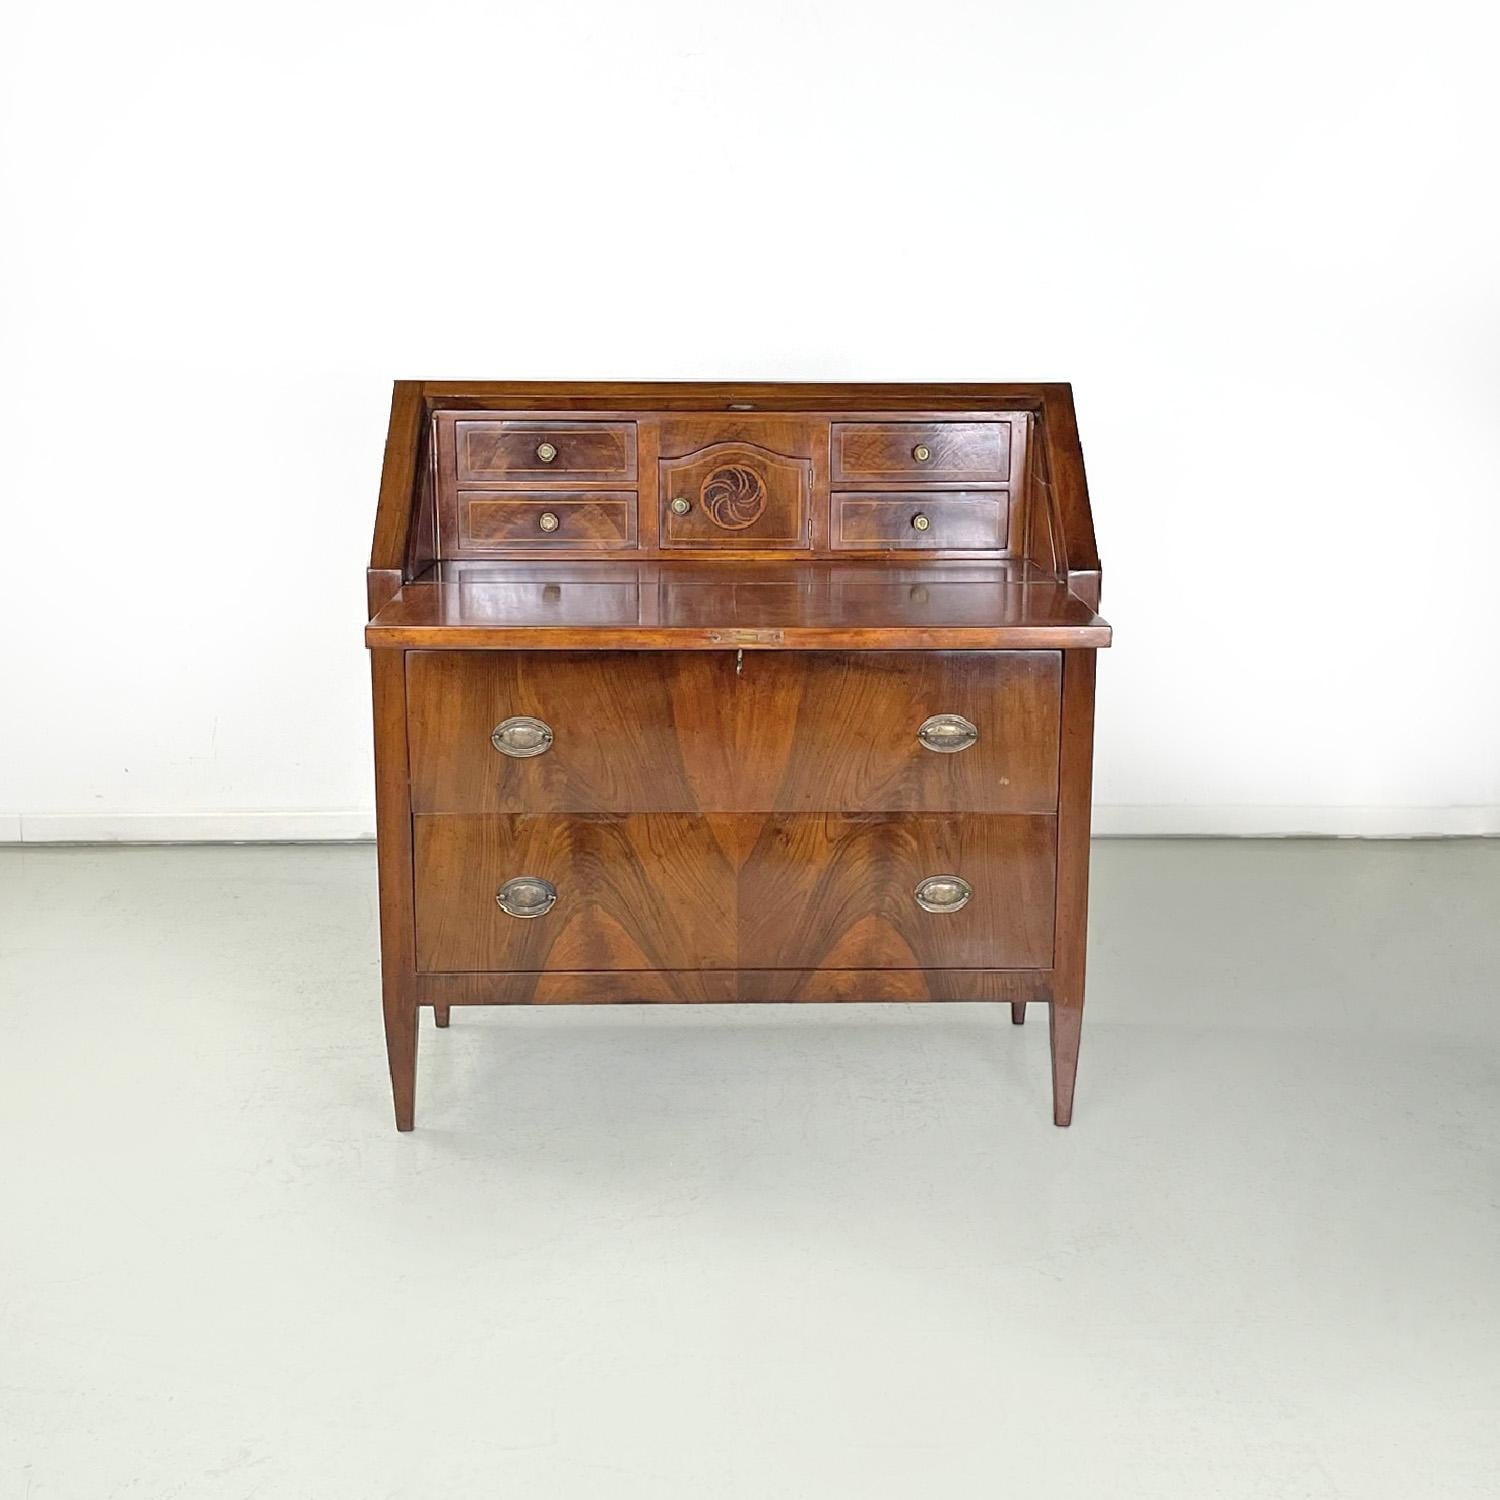 Early 20th Century Italian wooden chest of drawers or writing desk with flap, 1900s